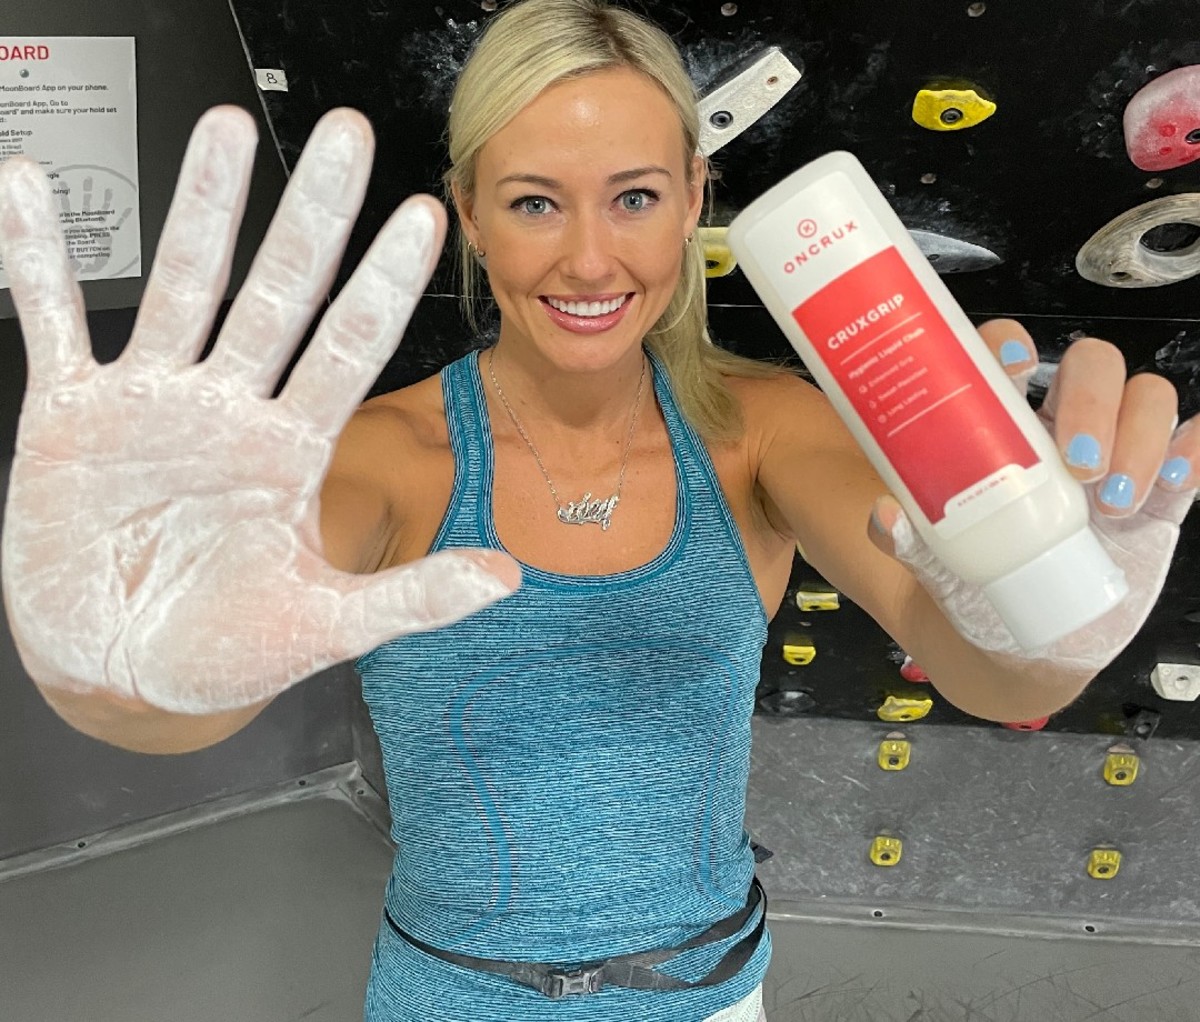 Pro climber and OnCrux athlete Sierra Blair-Coyle shows off a chalked hand